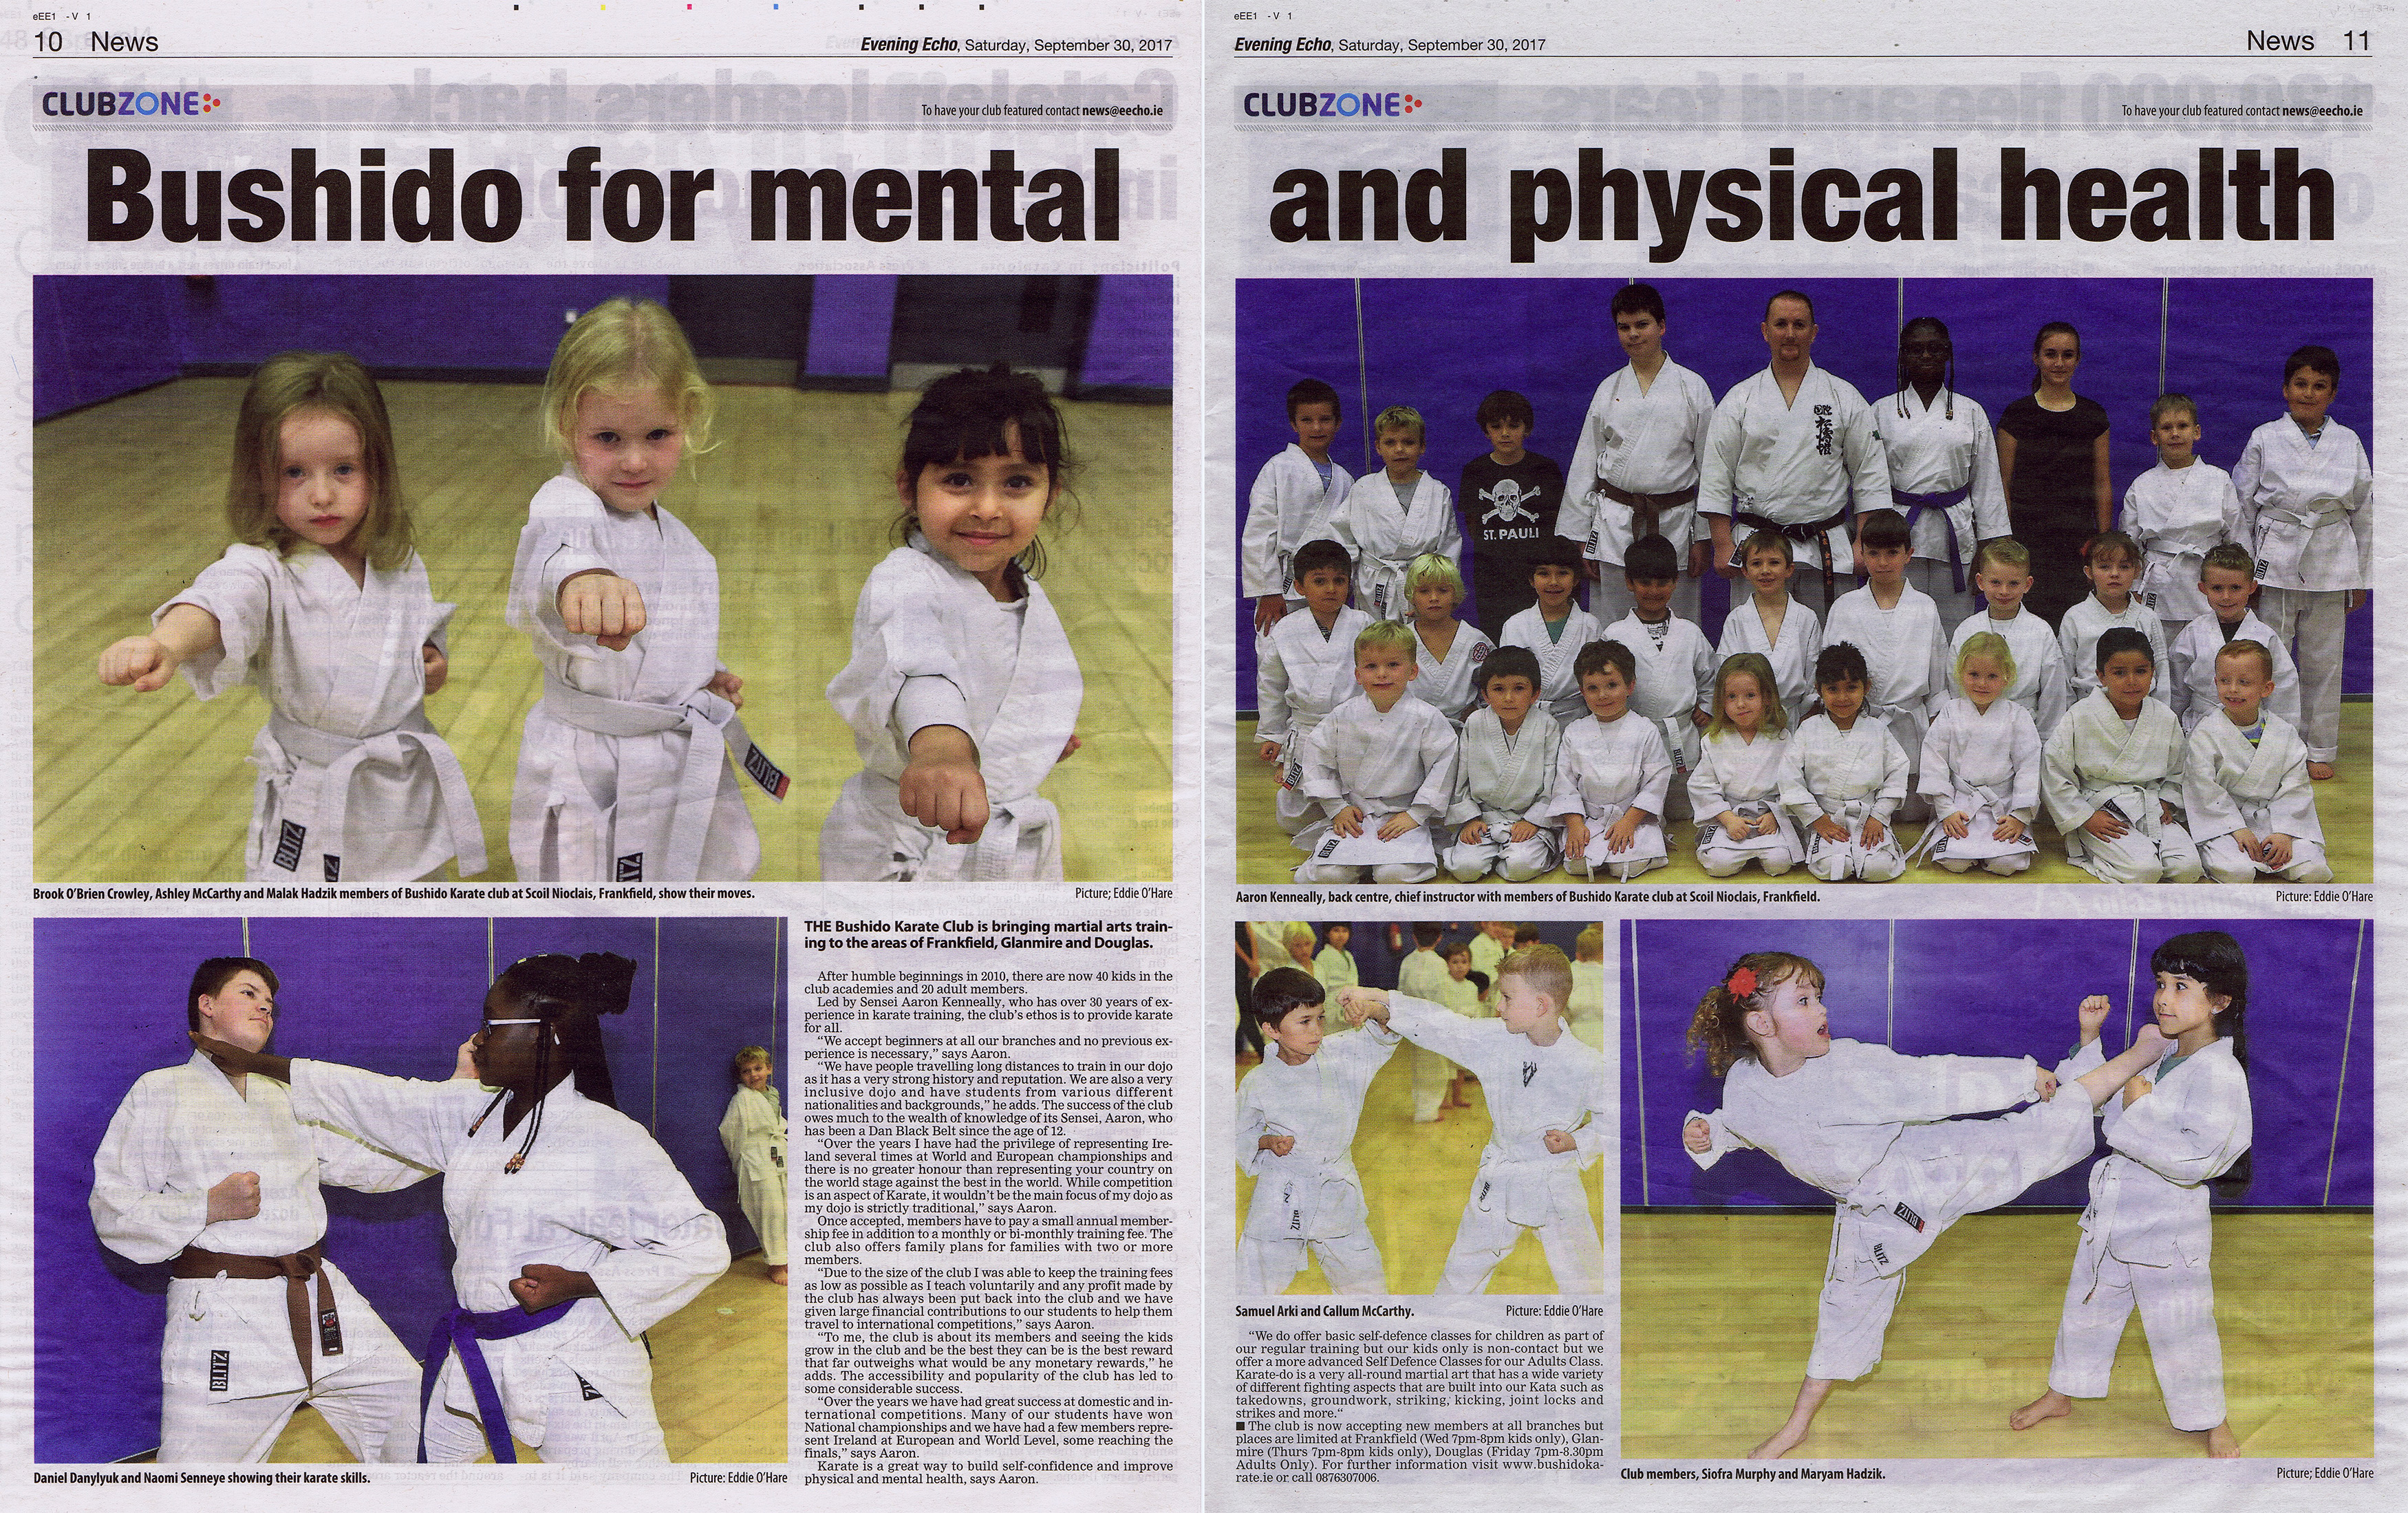 Evening Echo Feature - Bushido for mental and physical health